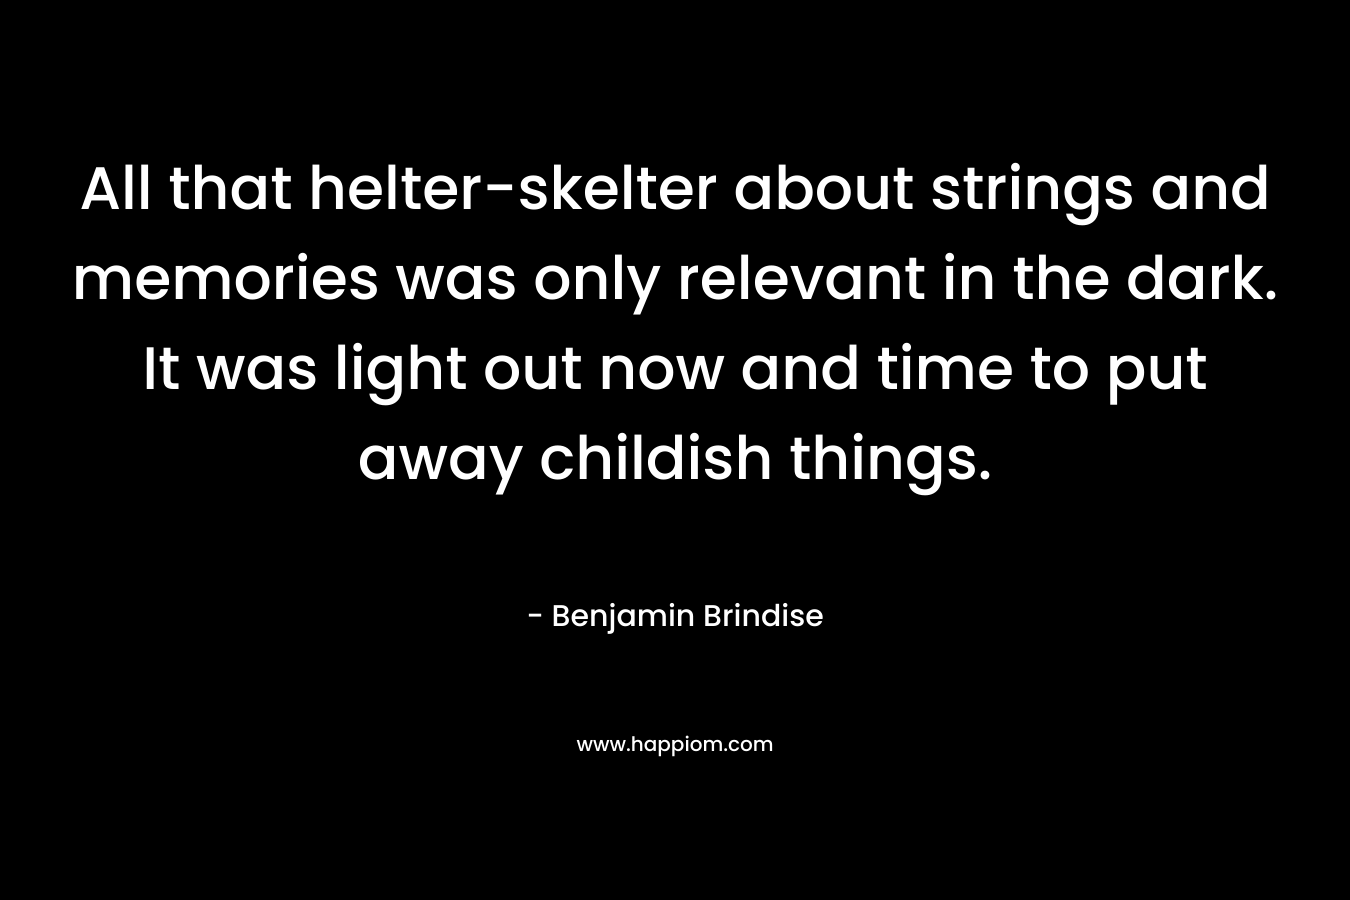 All that helter-skelter about strings and memories was only relevant in the dark. It was light out now and time to put away childish things. – Benjamin Brindise